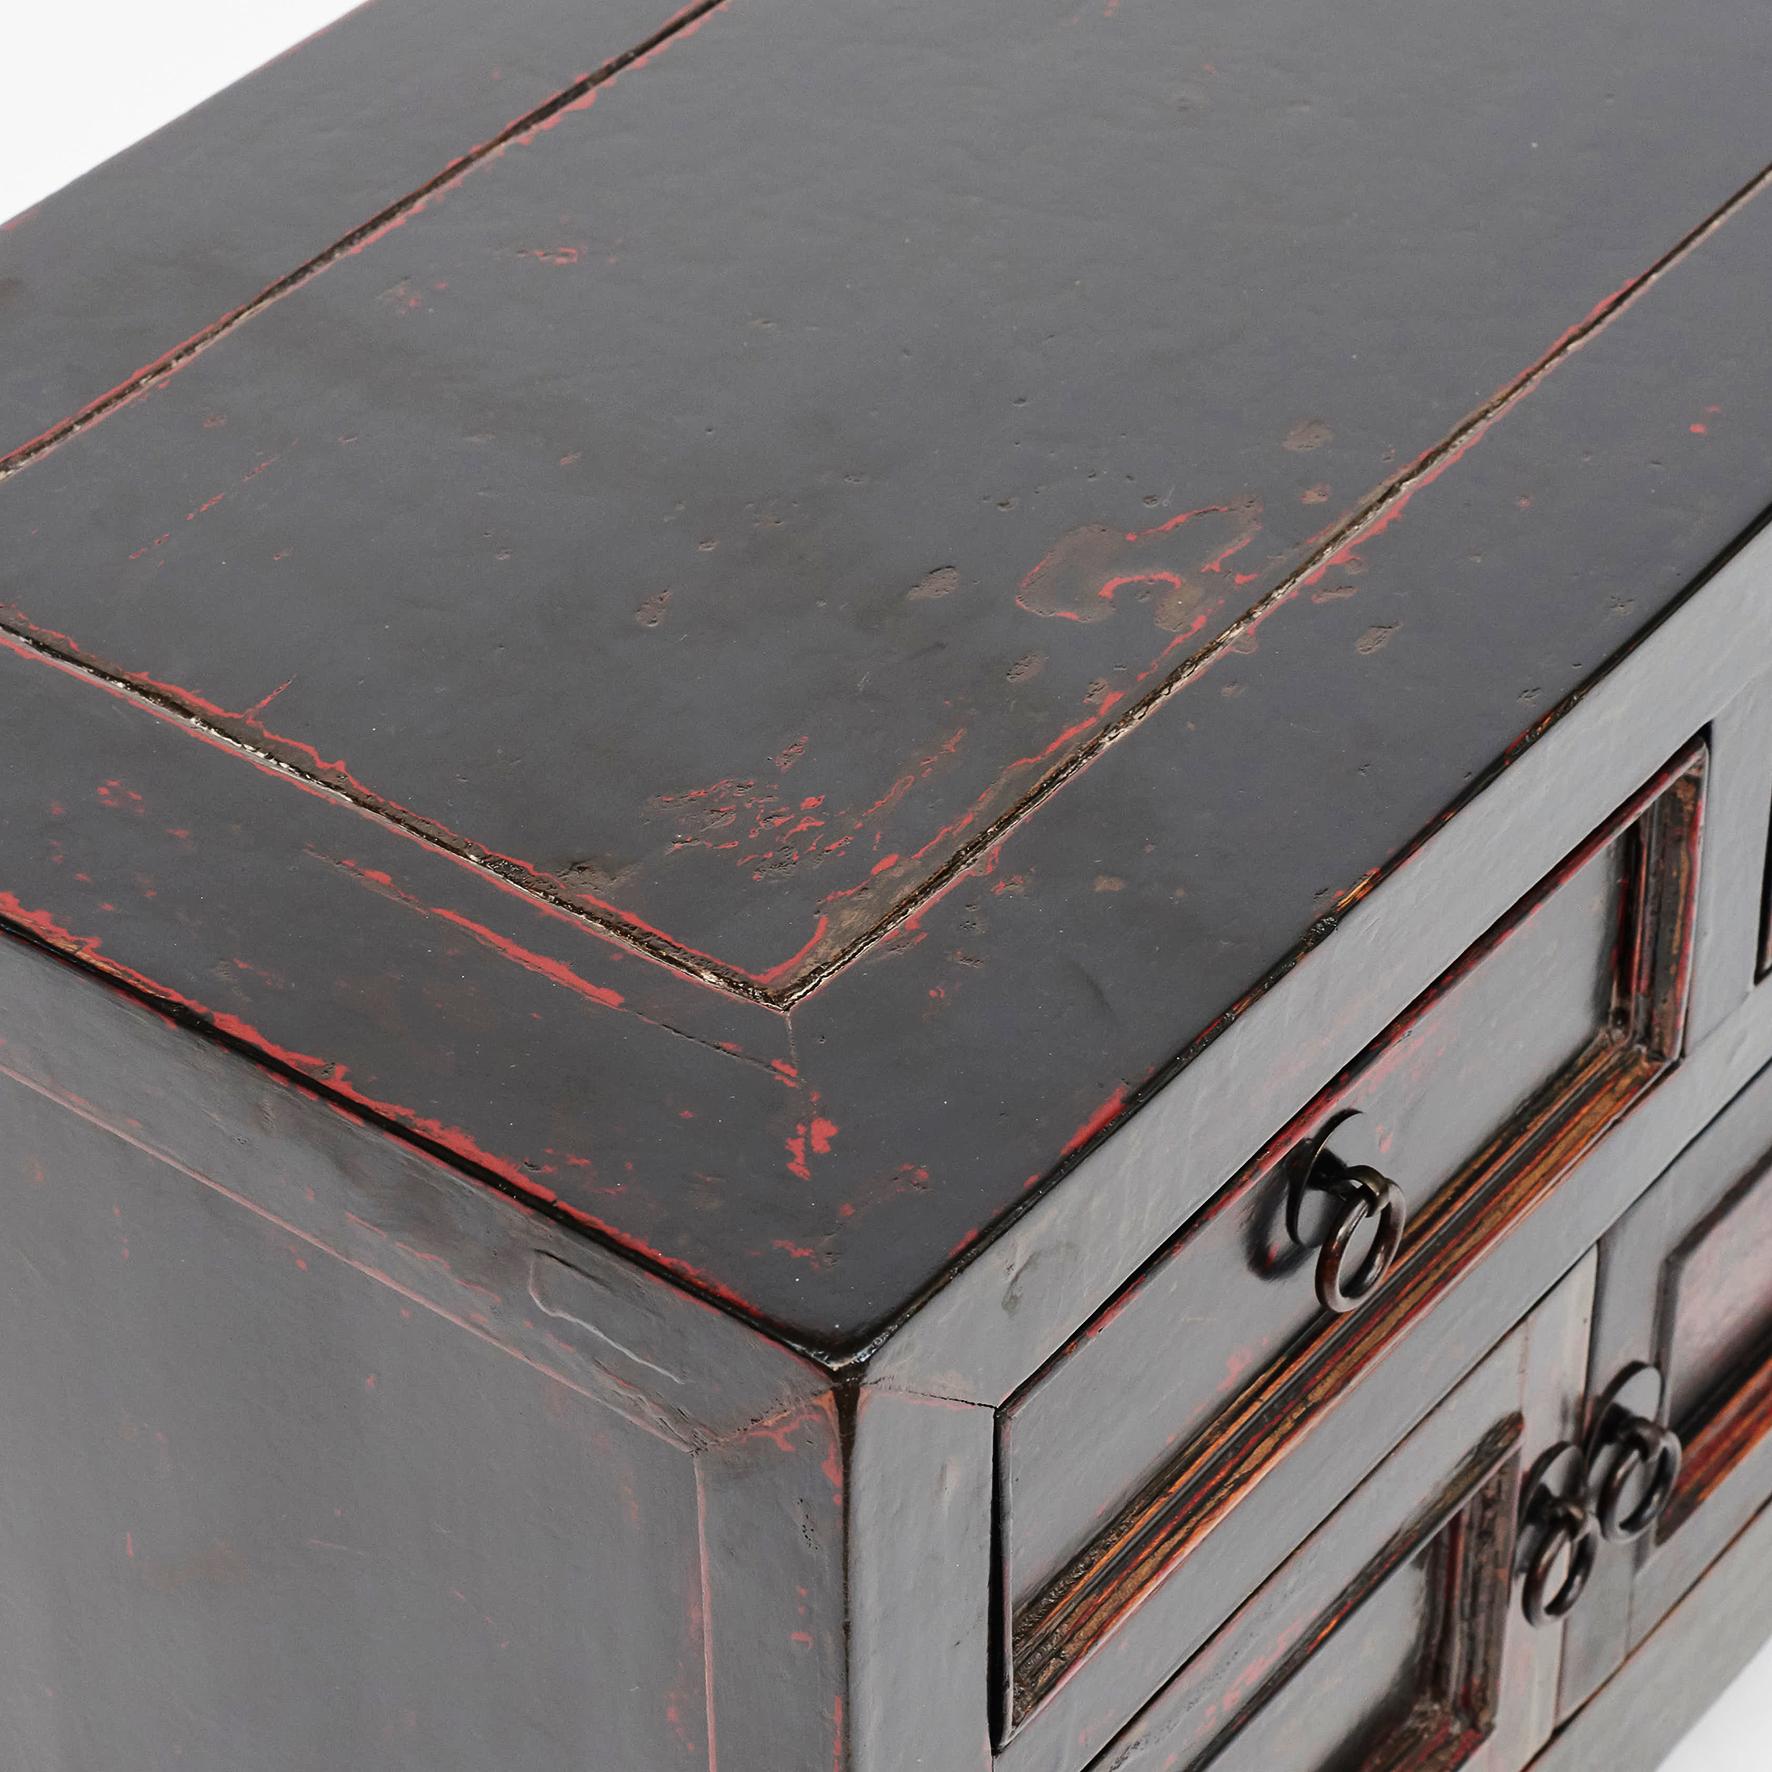 19th Century Low Qing Dynasty Kang Cabinet with in Original Black-Red Lacquer